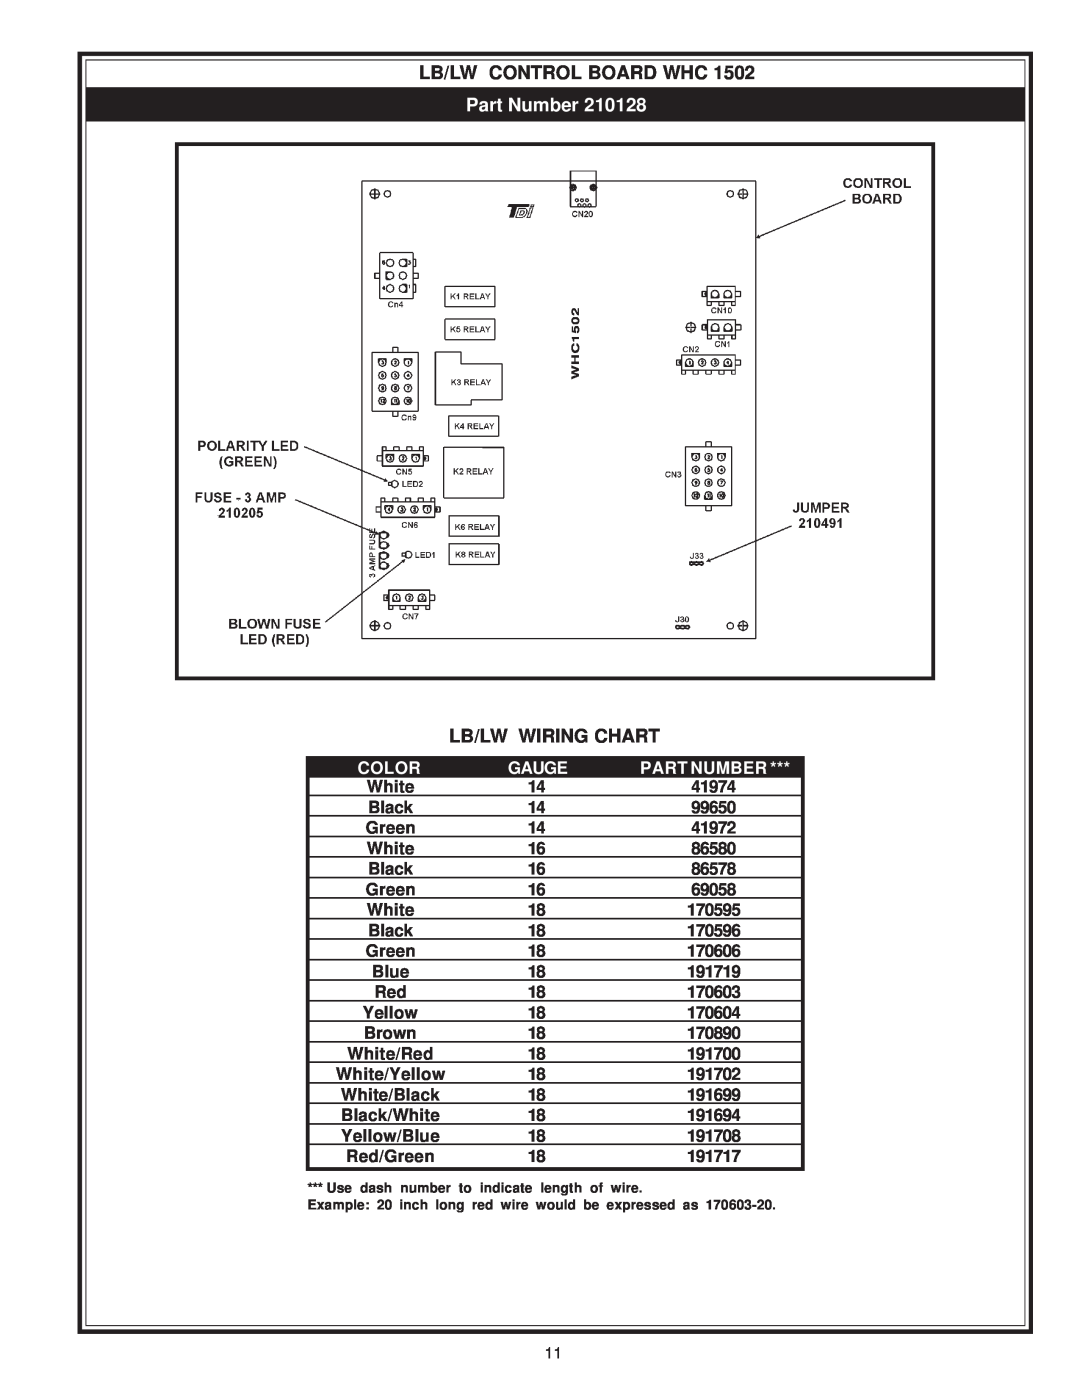 A.O. Smith 750 & 1000, LB/LW: 500 manual Part Number, Lb/Lw Control Board Whc, Lb/Lw Wiring Chart, Color, Gauge 